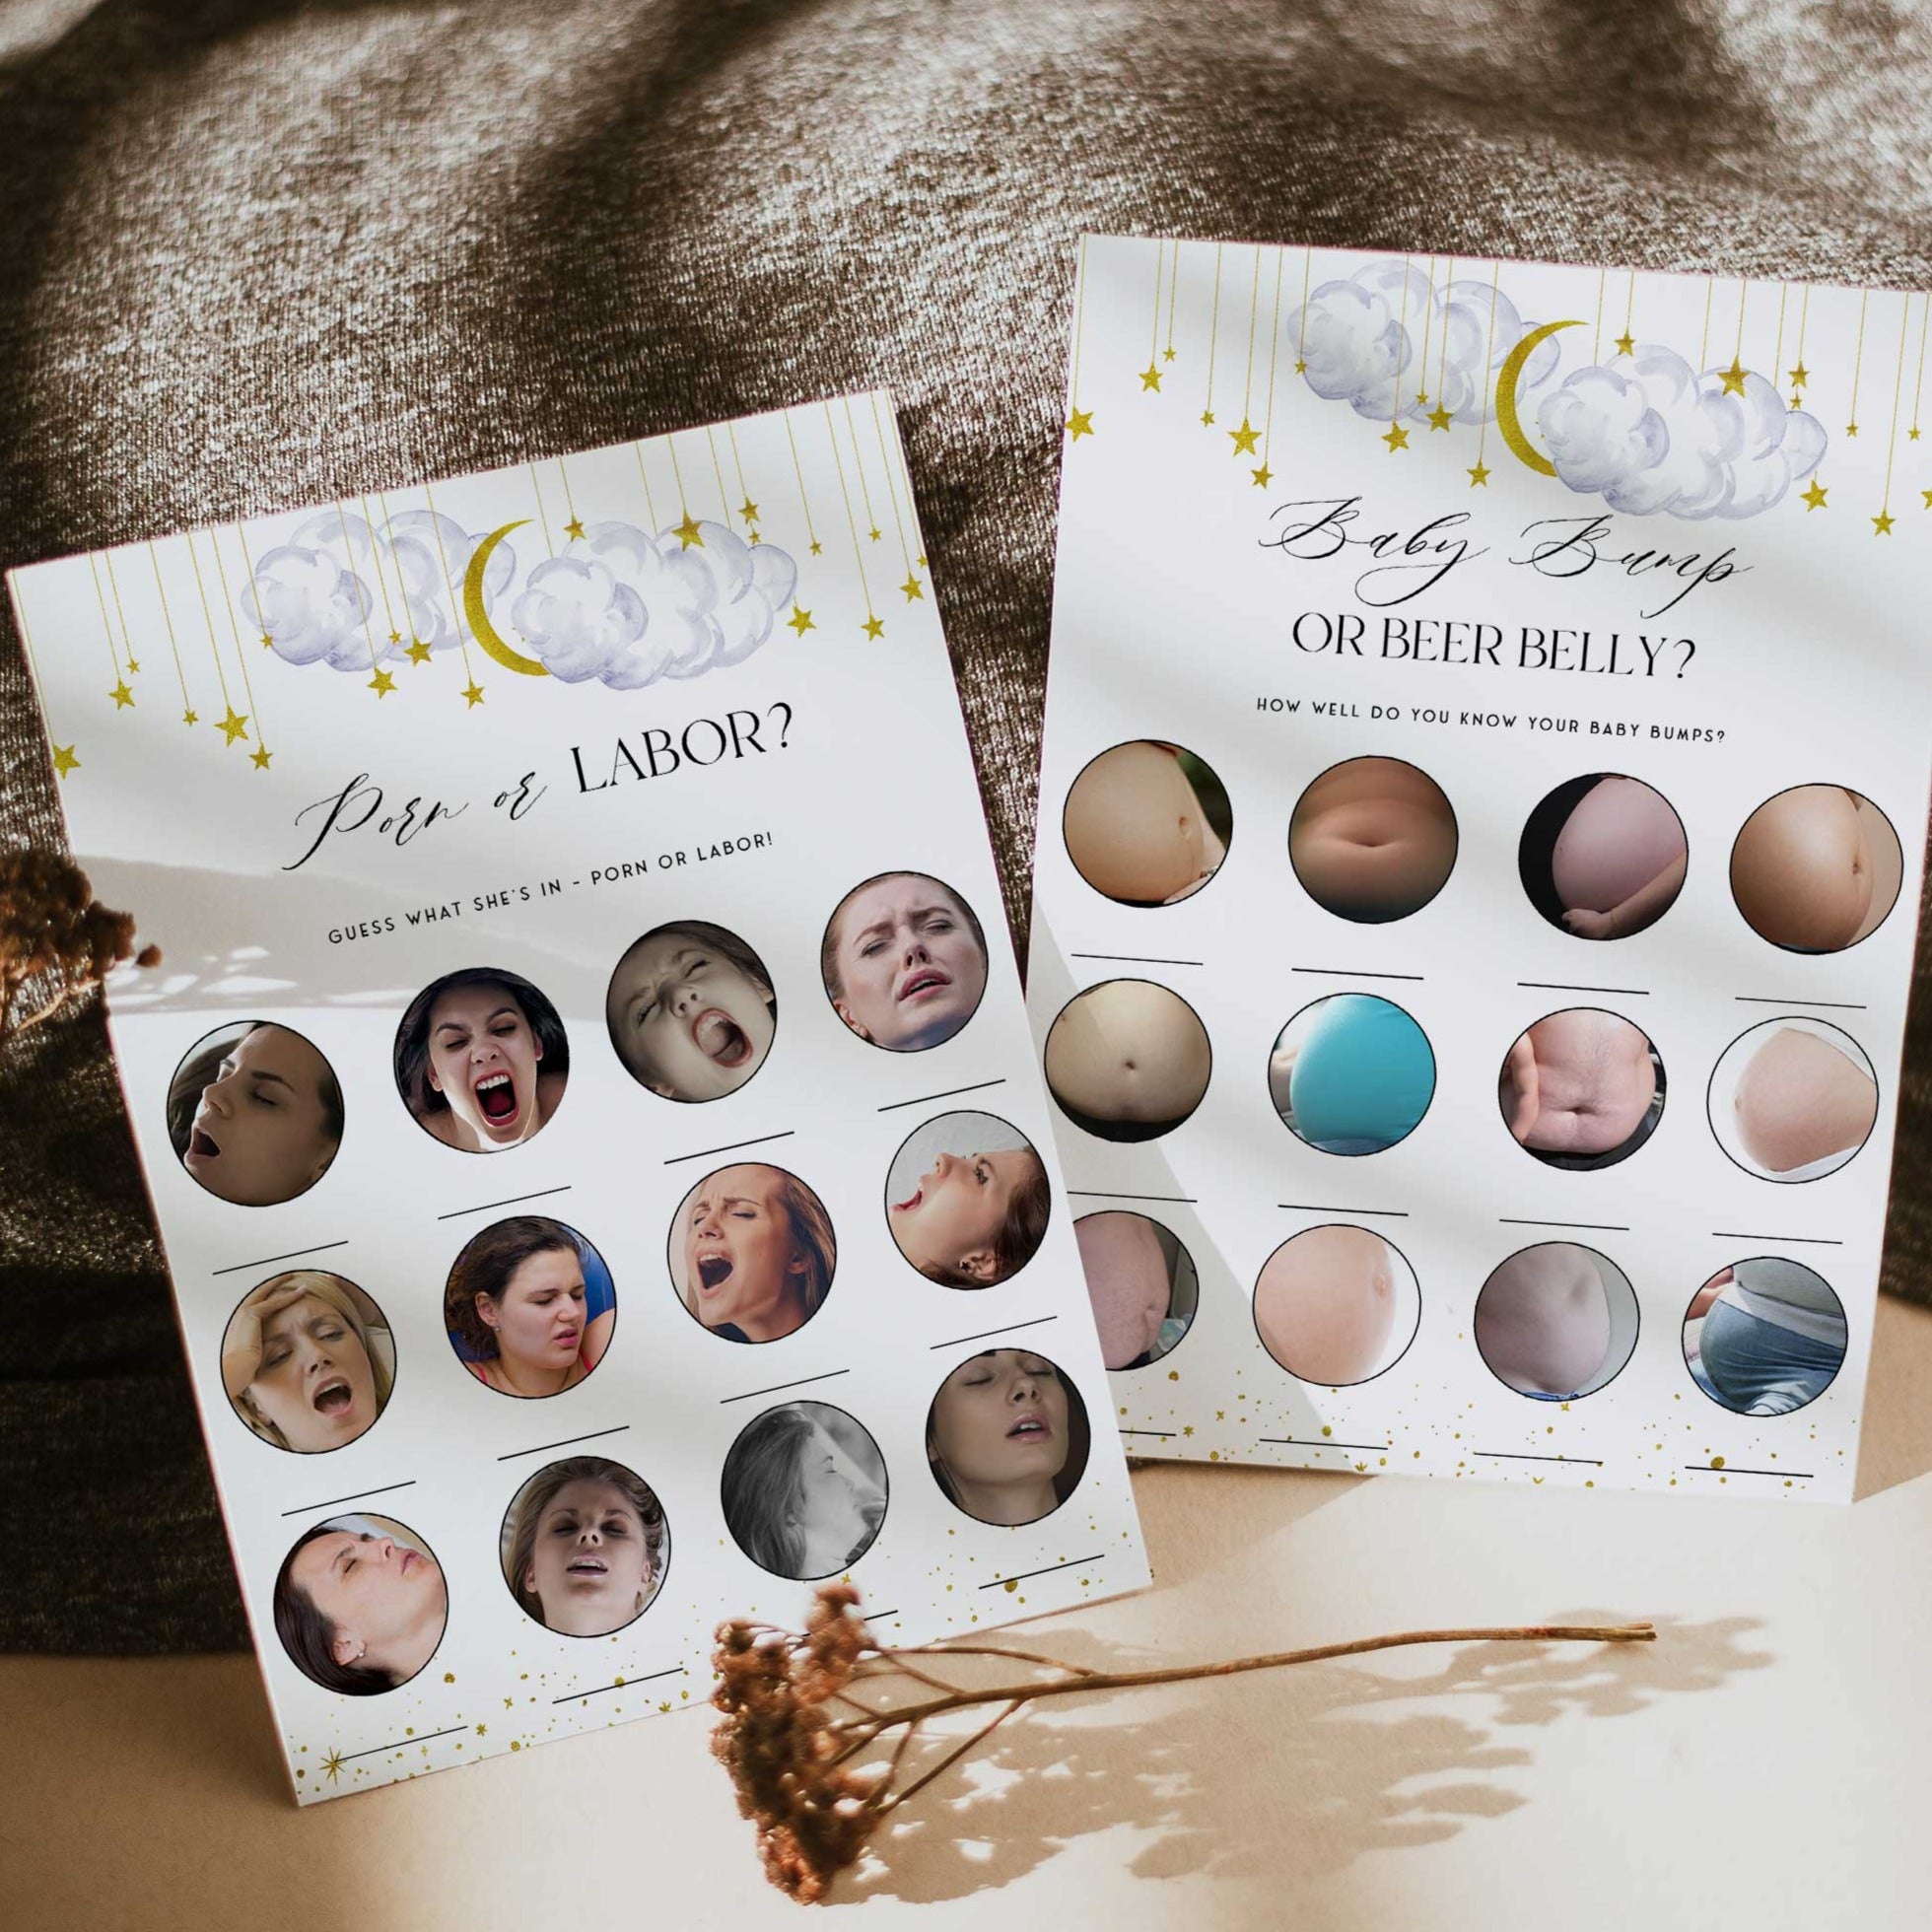 twinkle little star baby games, labor or porn game, printable baby games, baby bump or beer belly game, little star baby game